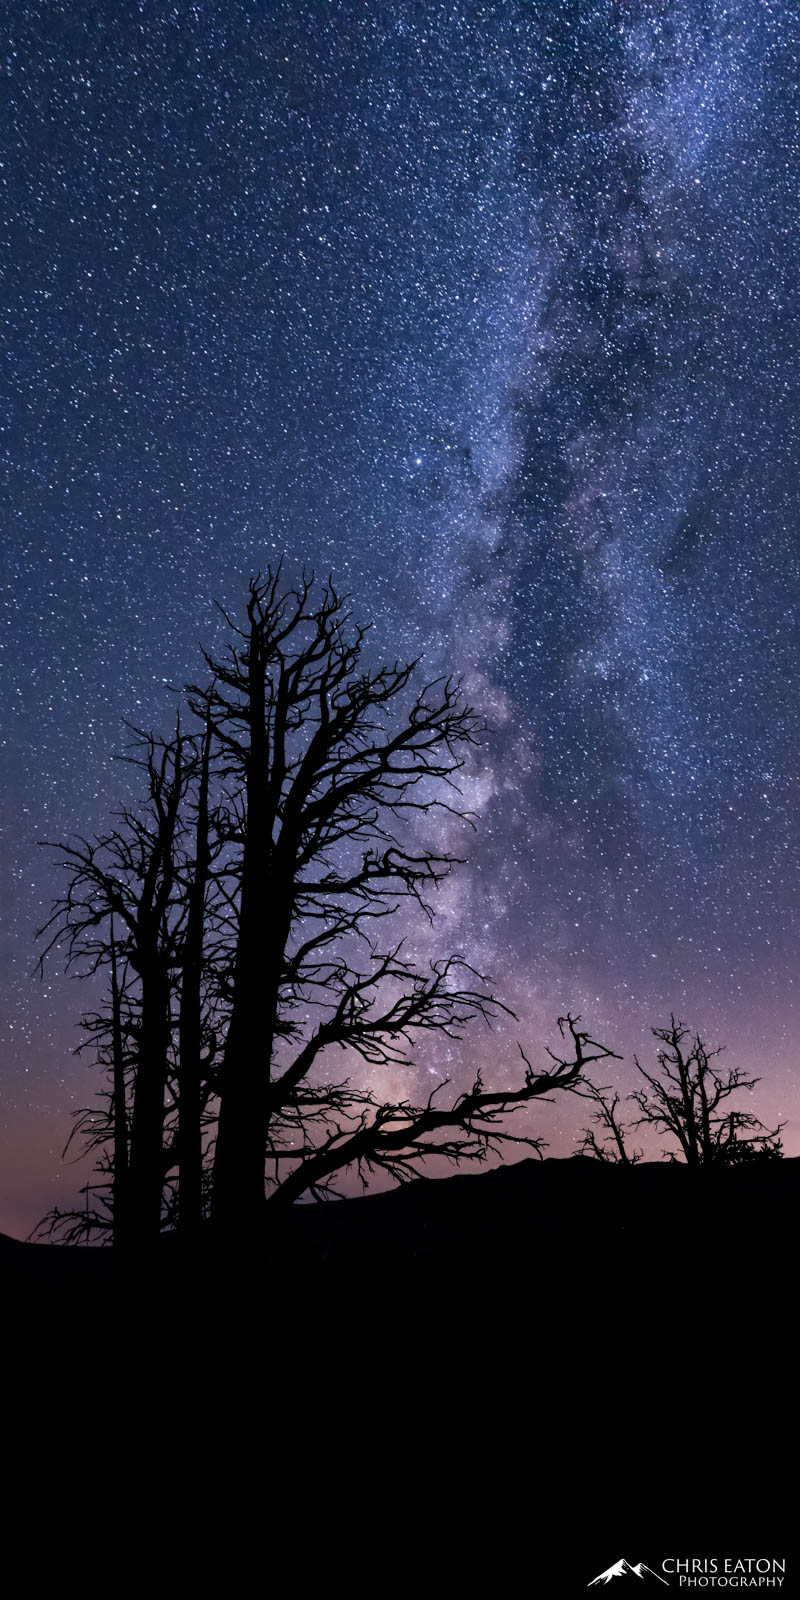 Silhouette of Bristlecone Pine trees and the Milky Way galaxy.